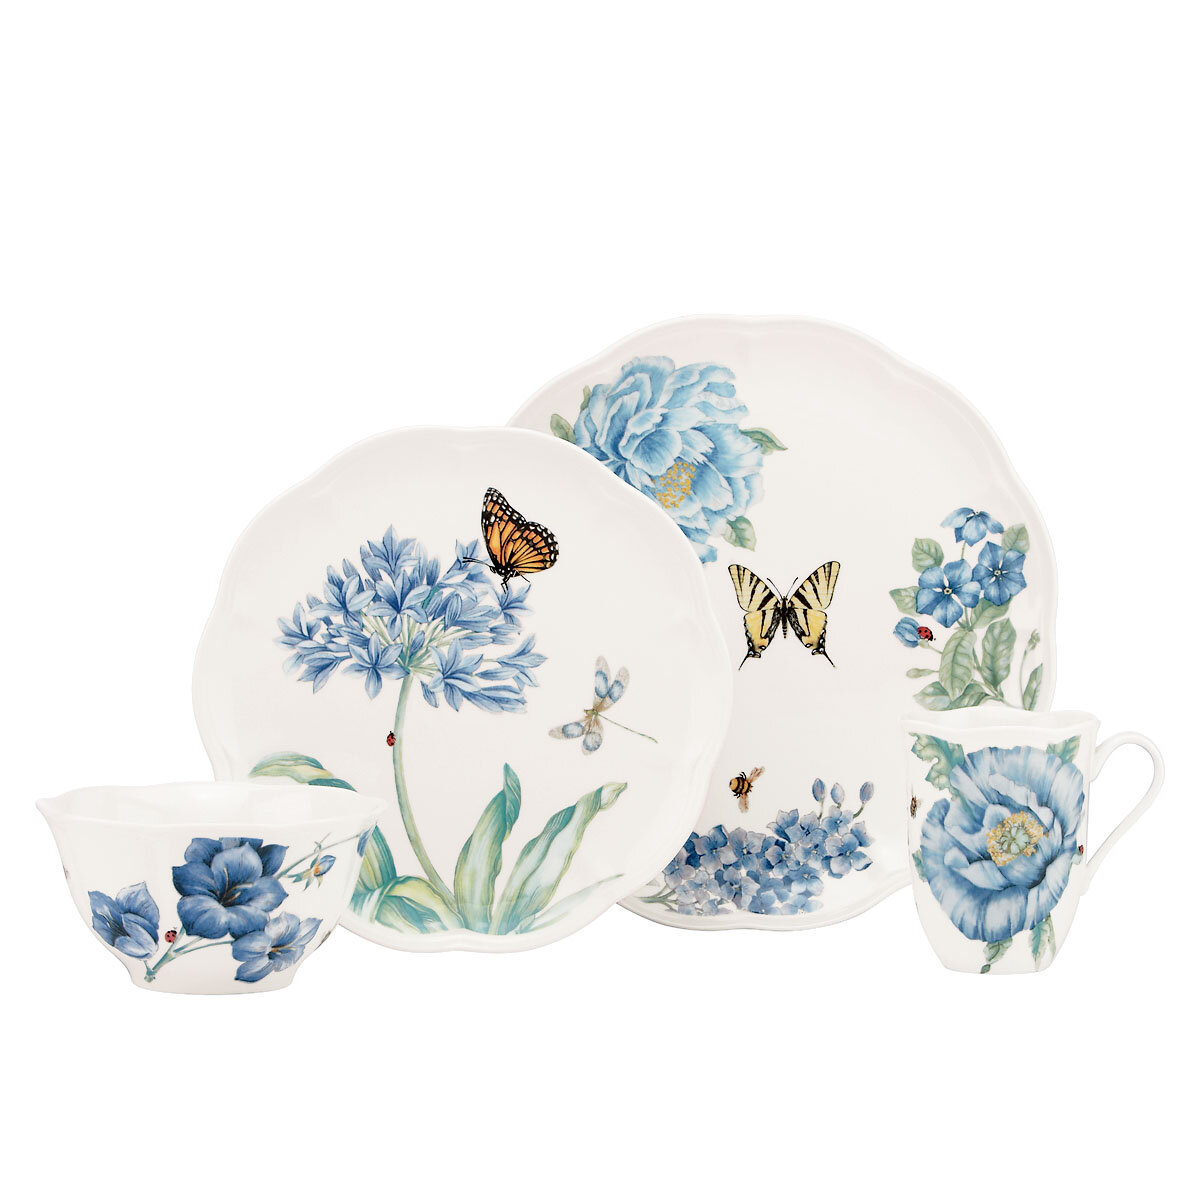 Lenox Butterfly Meadow 4 Piece Place Setting, Service for 1